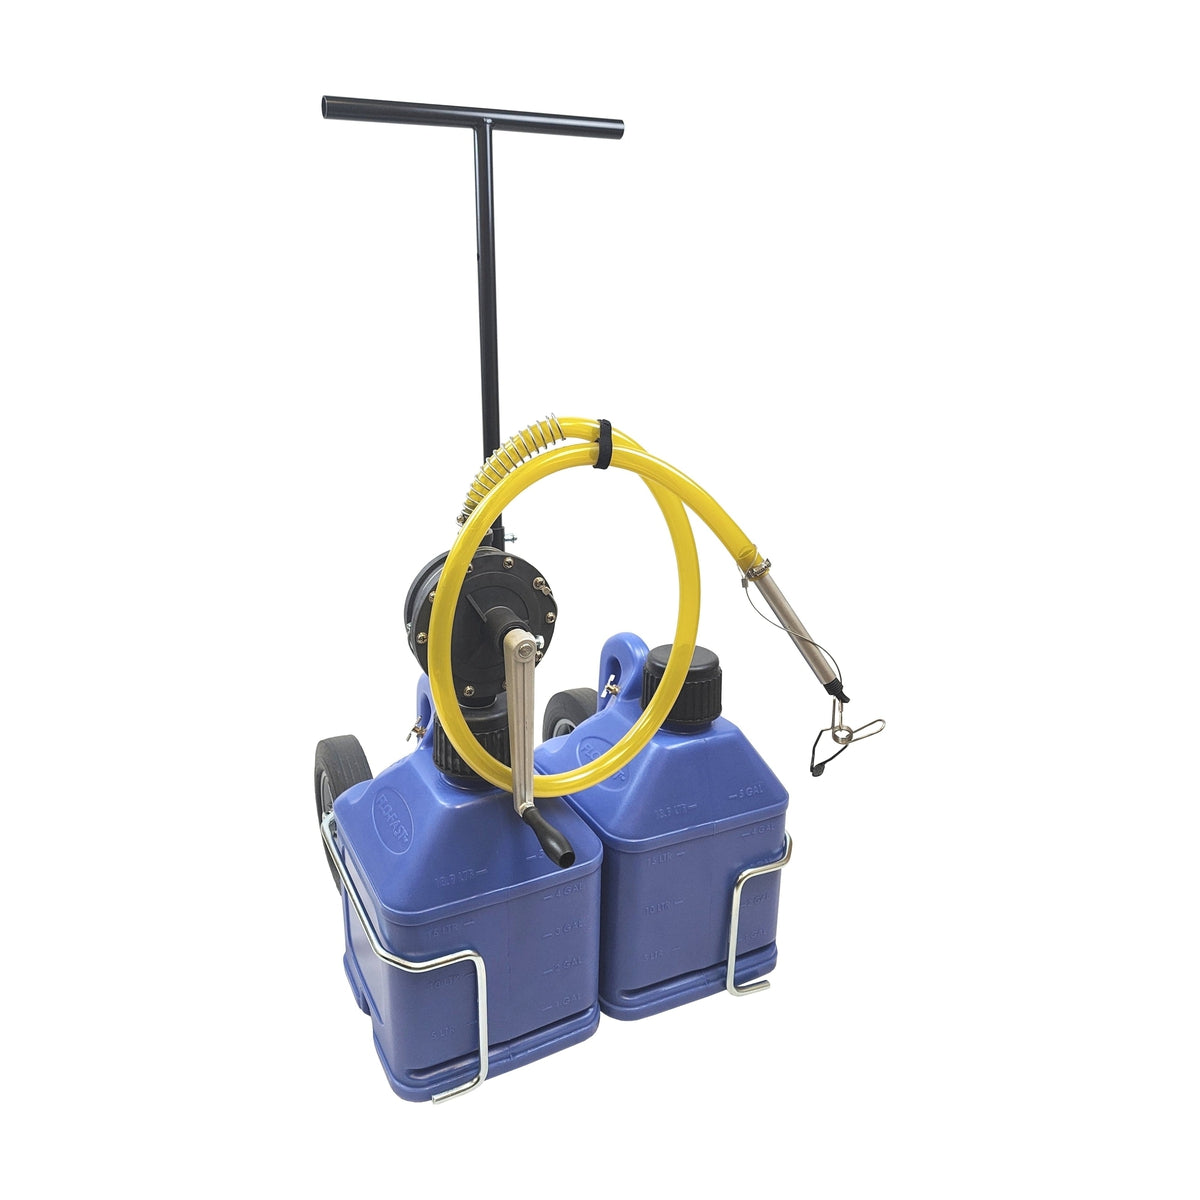 Flo-Fast Not Qualified for Free Shipping Flo-Fast Pro 10 Gallon Fluid Transfer System & Versa Cart Blue #31010-B